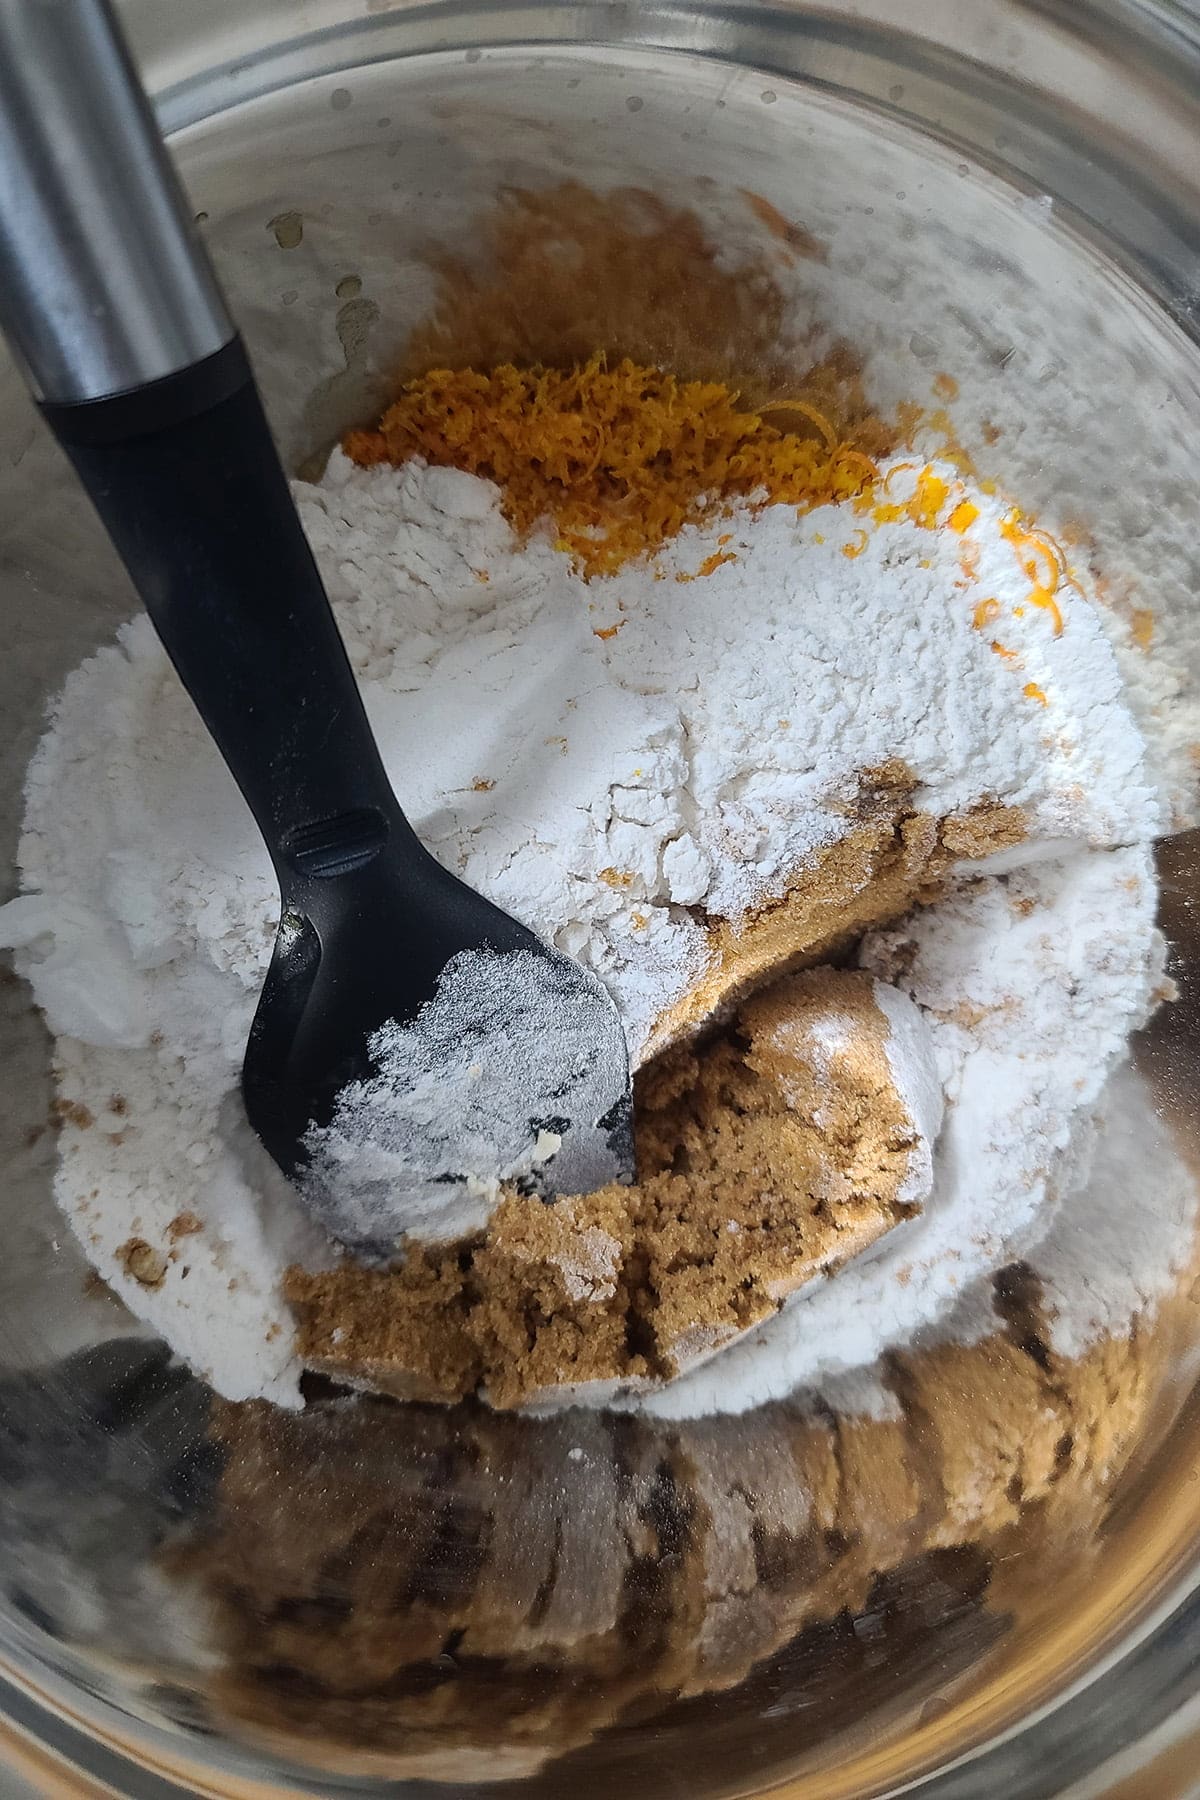 FLour, orange zest, and brown sugar are seen being stirred together in a large bowl.